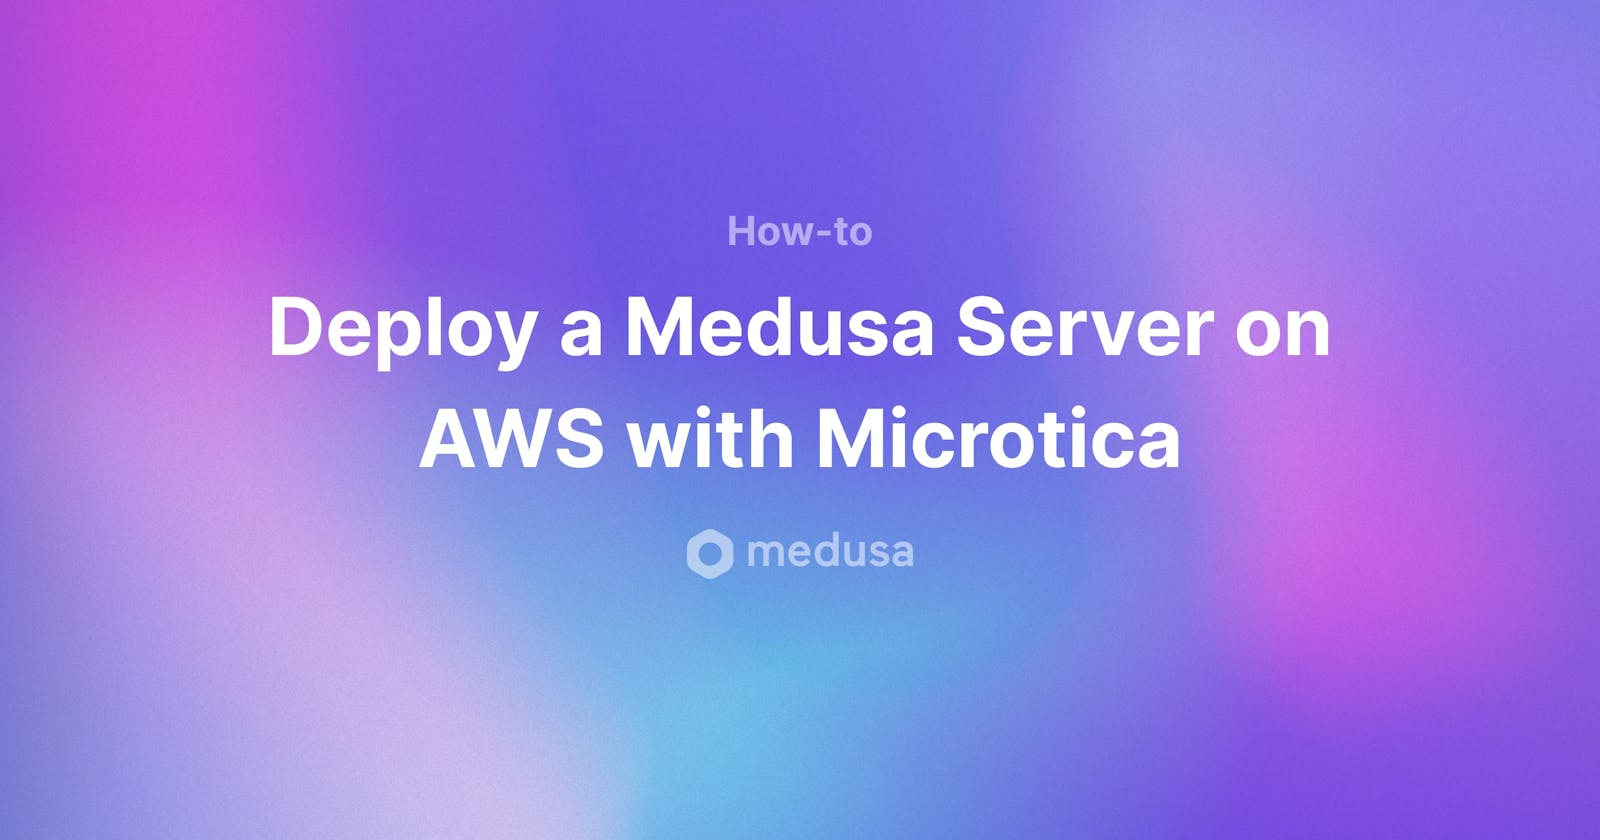 How to Deploy Medusa on AWS with Microtica: A step-by-step guide